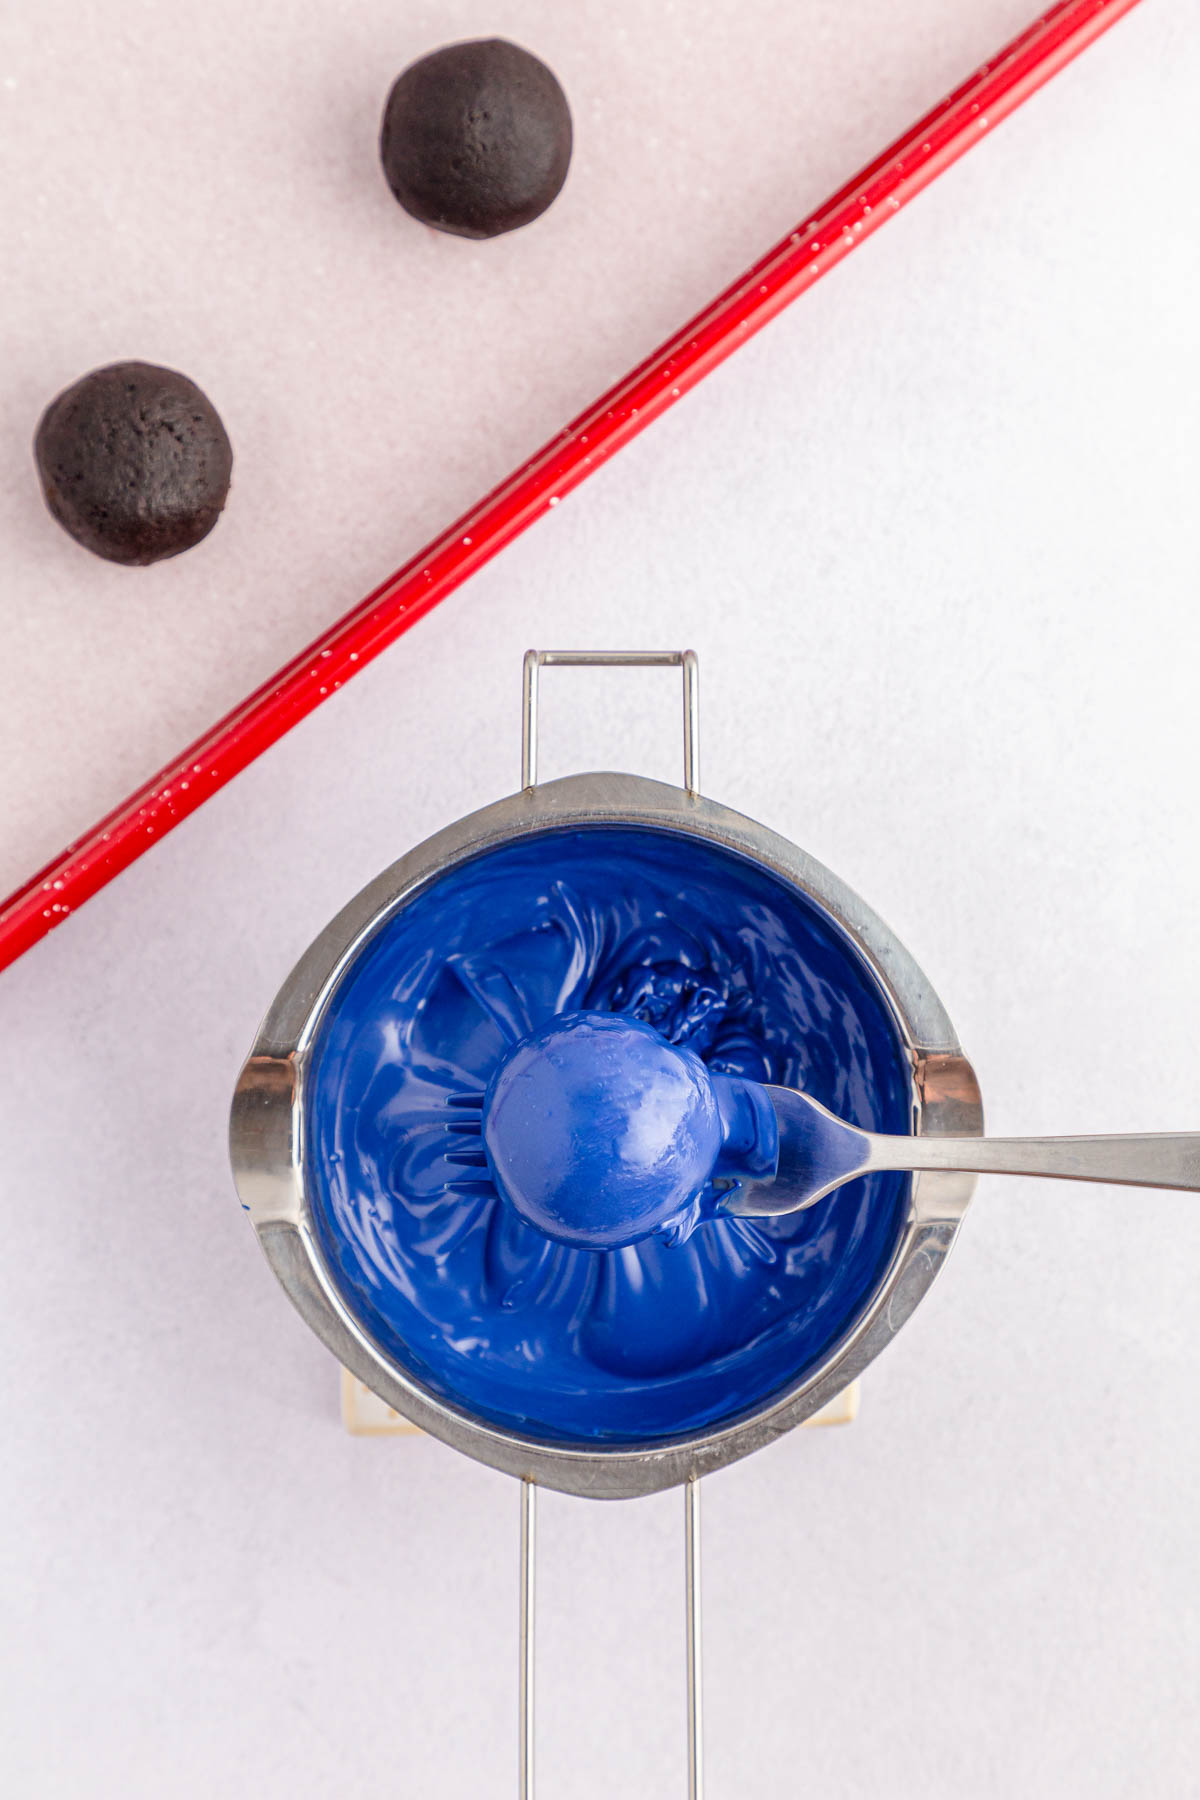 Oreo ball dipped in melted blue chocolate